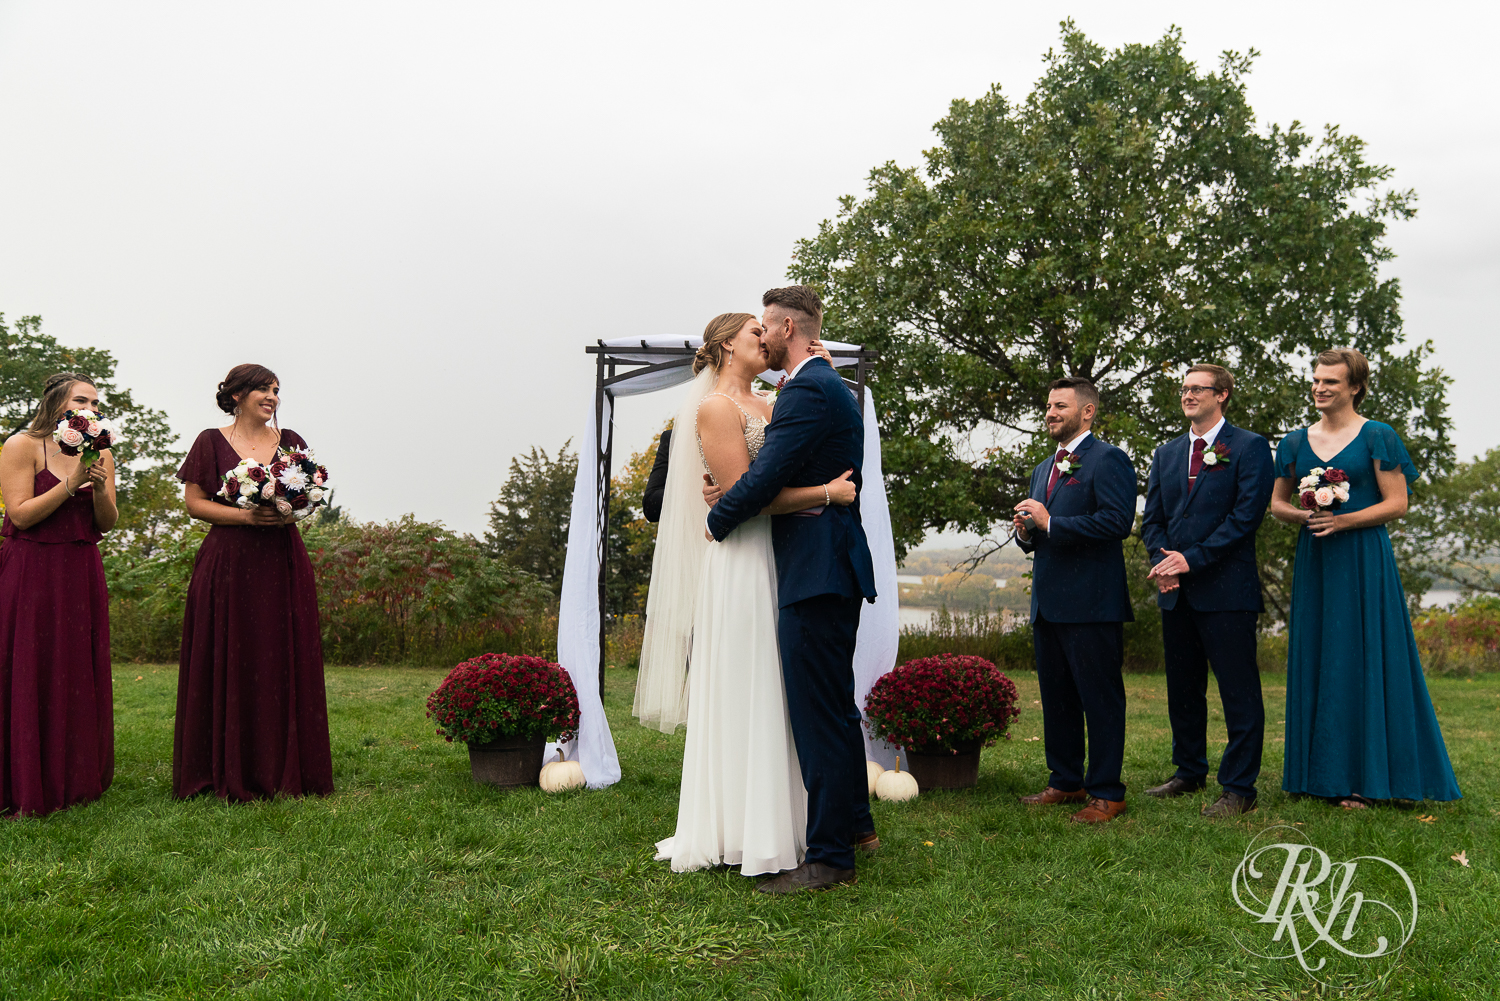 Bride and groom standing at alter at rainy wedding ceremony at Schaar's Bluff in Hastings, Minnesota. 